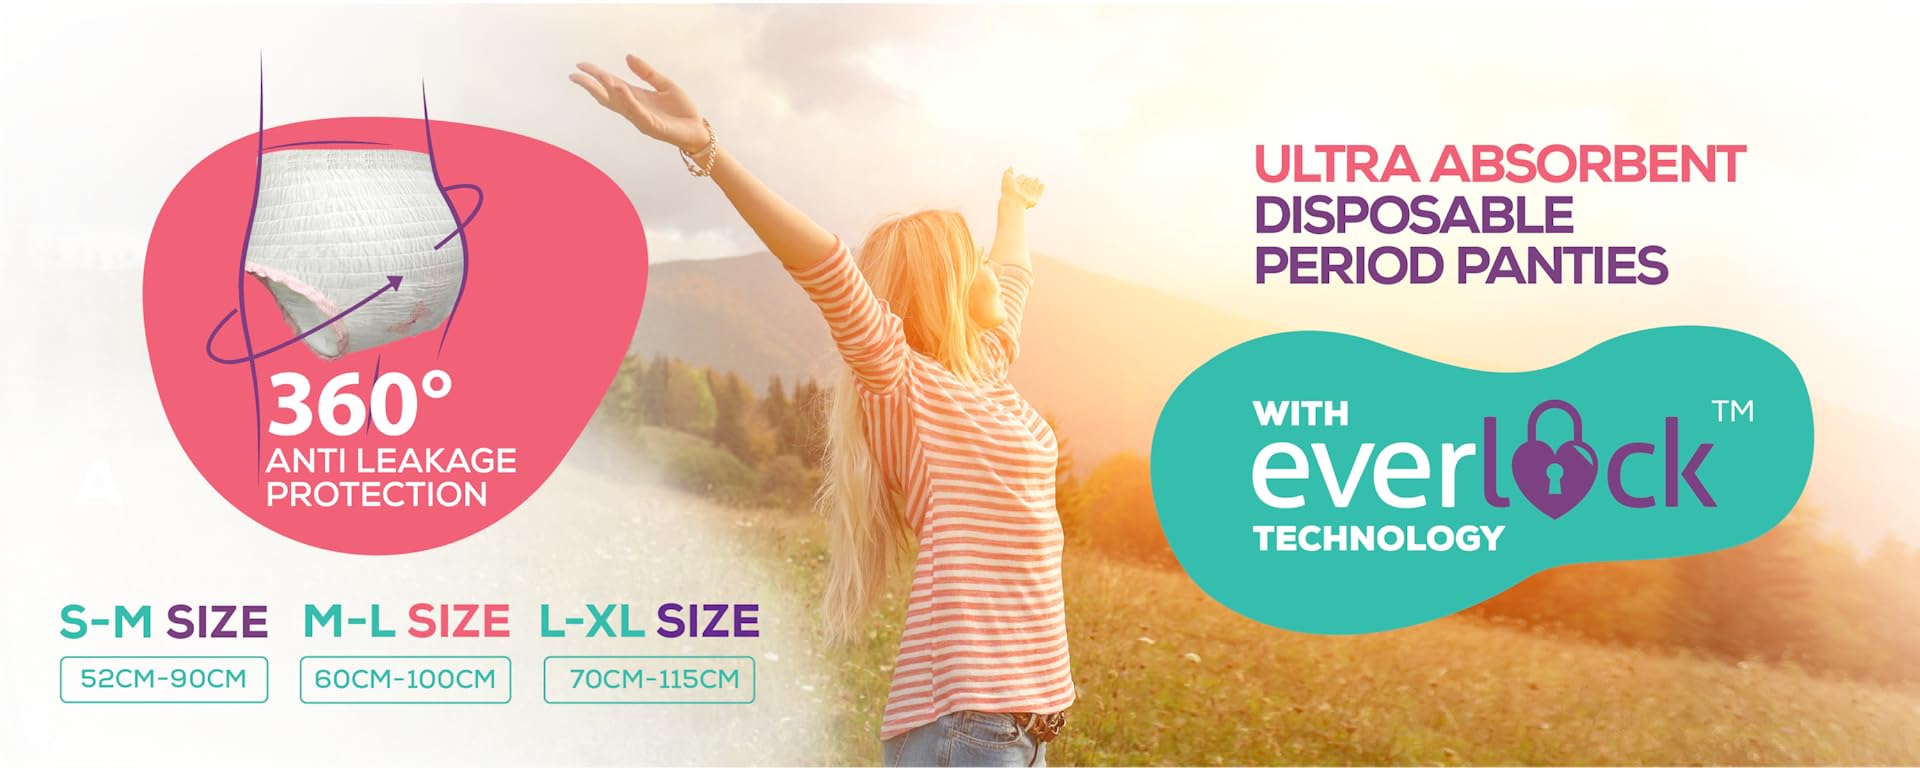 ad #collaboration I tried these EverEve Ultra Absorbent Disposable Period  Panties It has Innovative Everlock Technology that gives 3